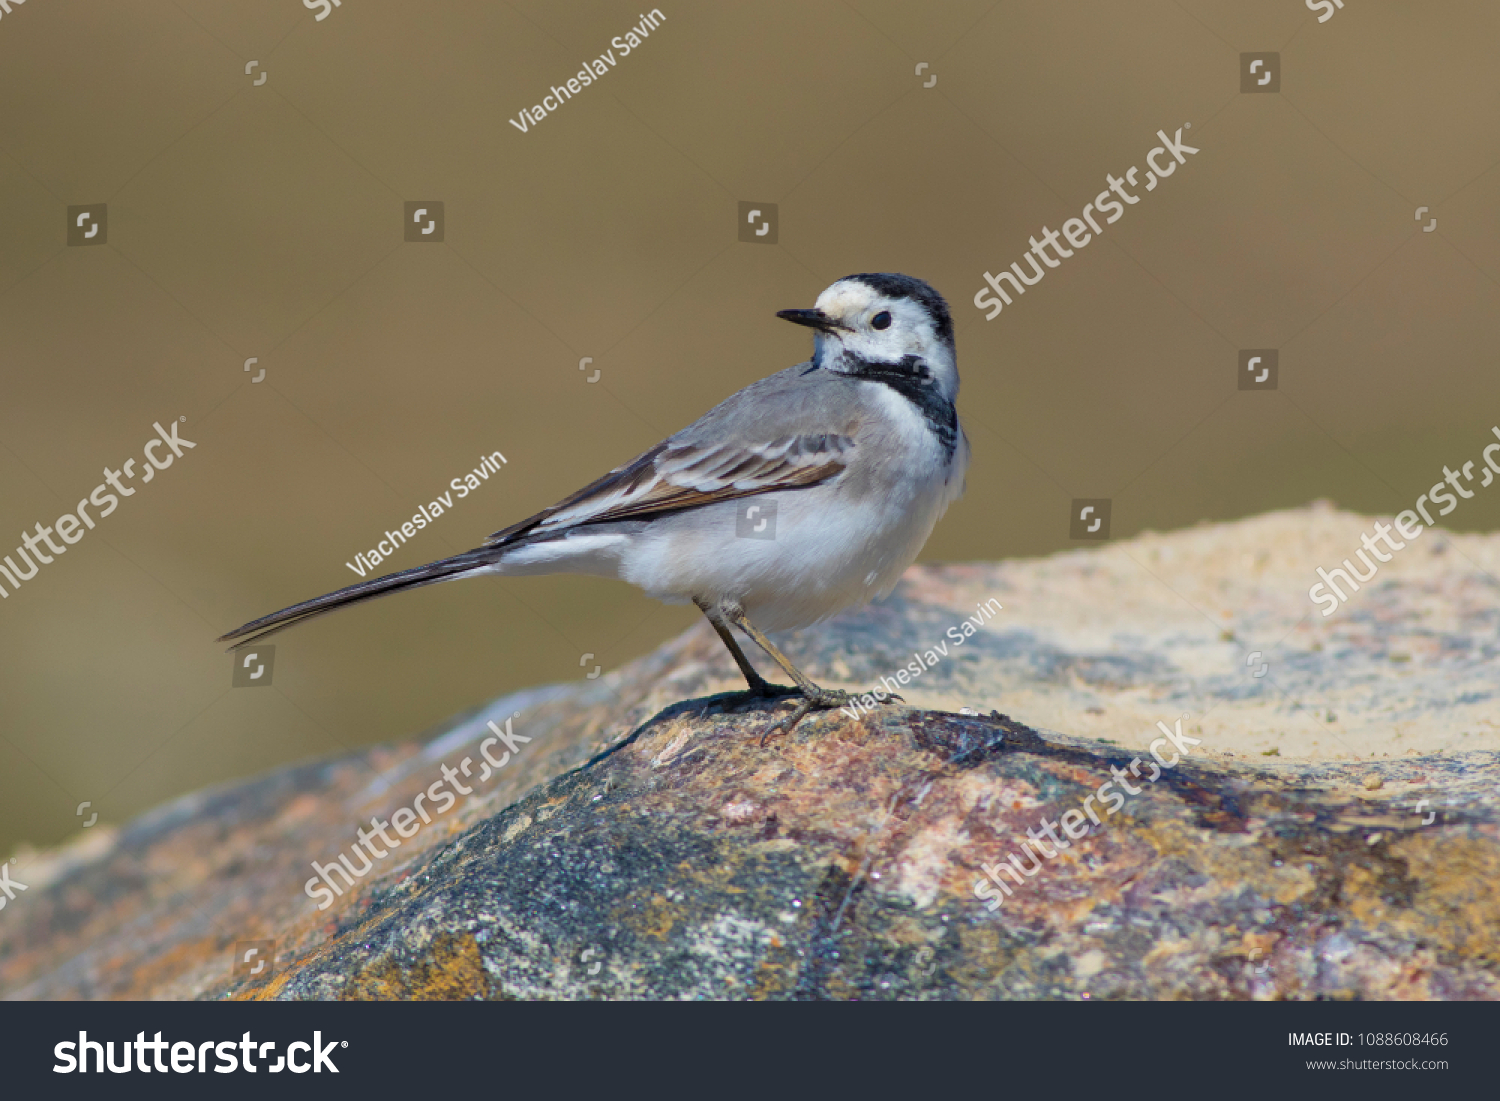 The bird is a wagtail shot close-up. #1088608466